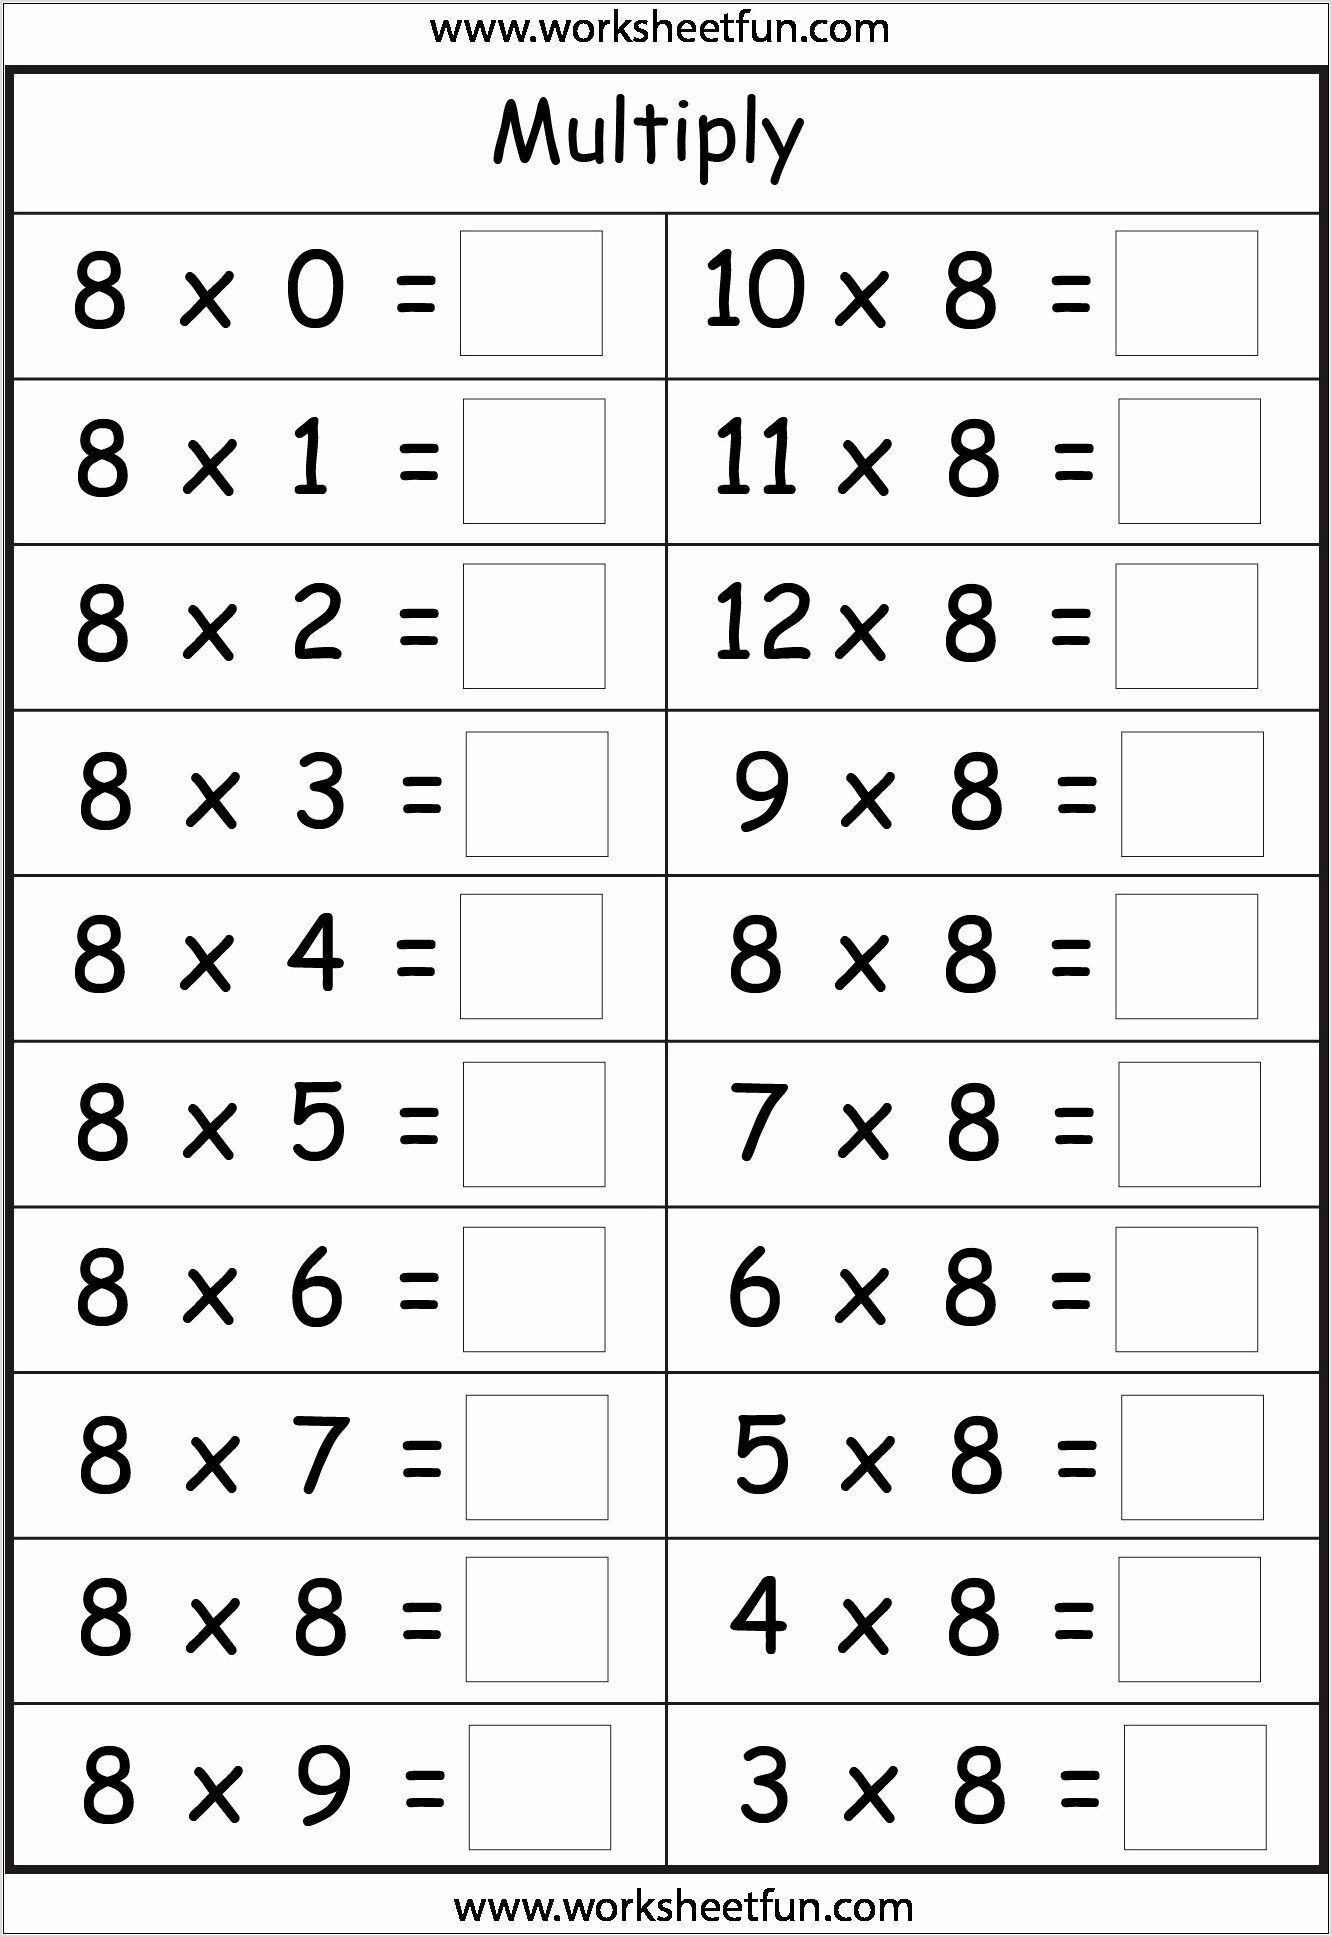 Times Tables Worksheets For Free